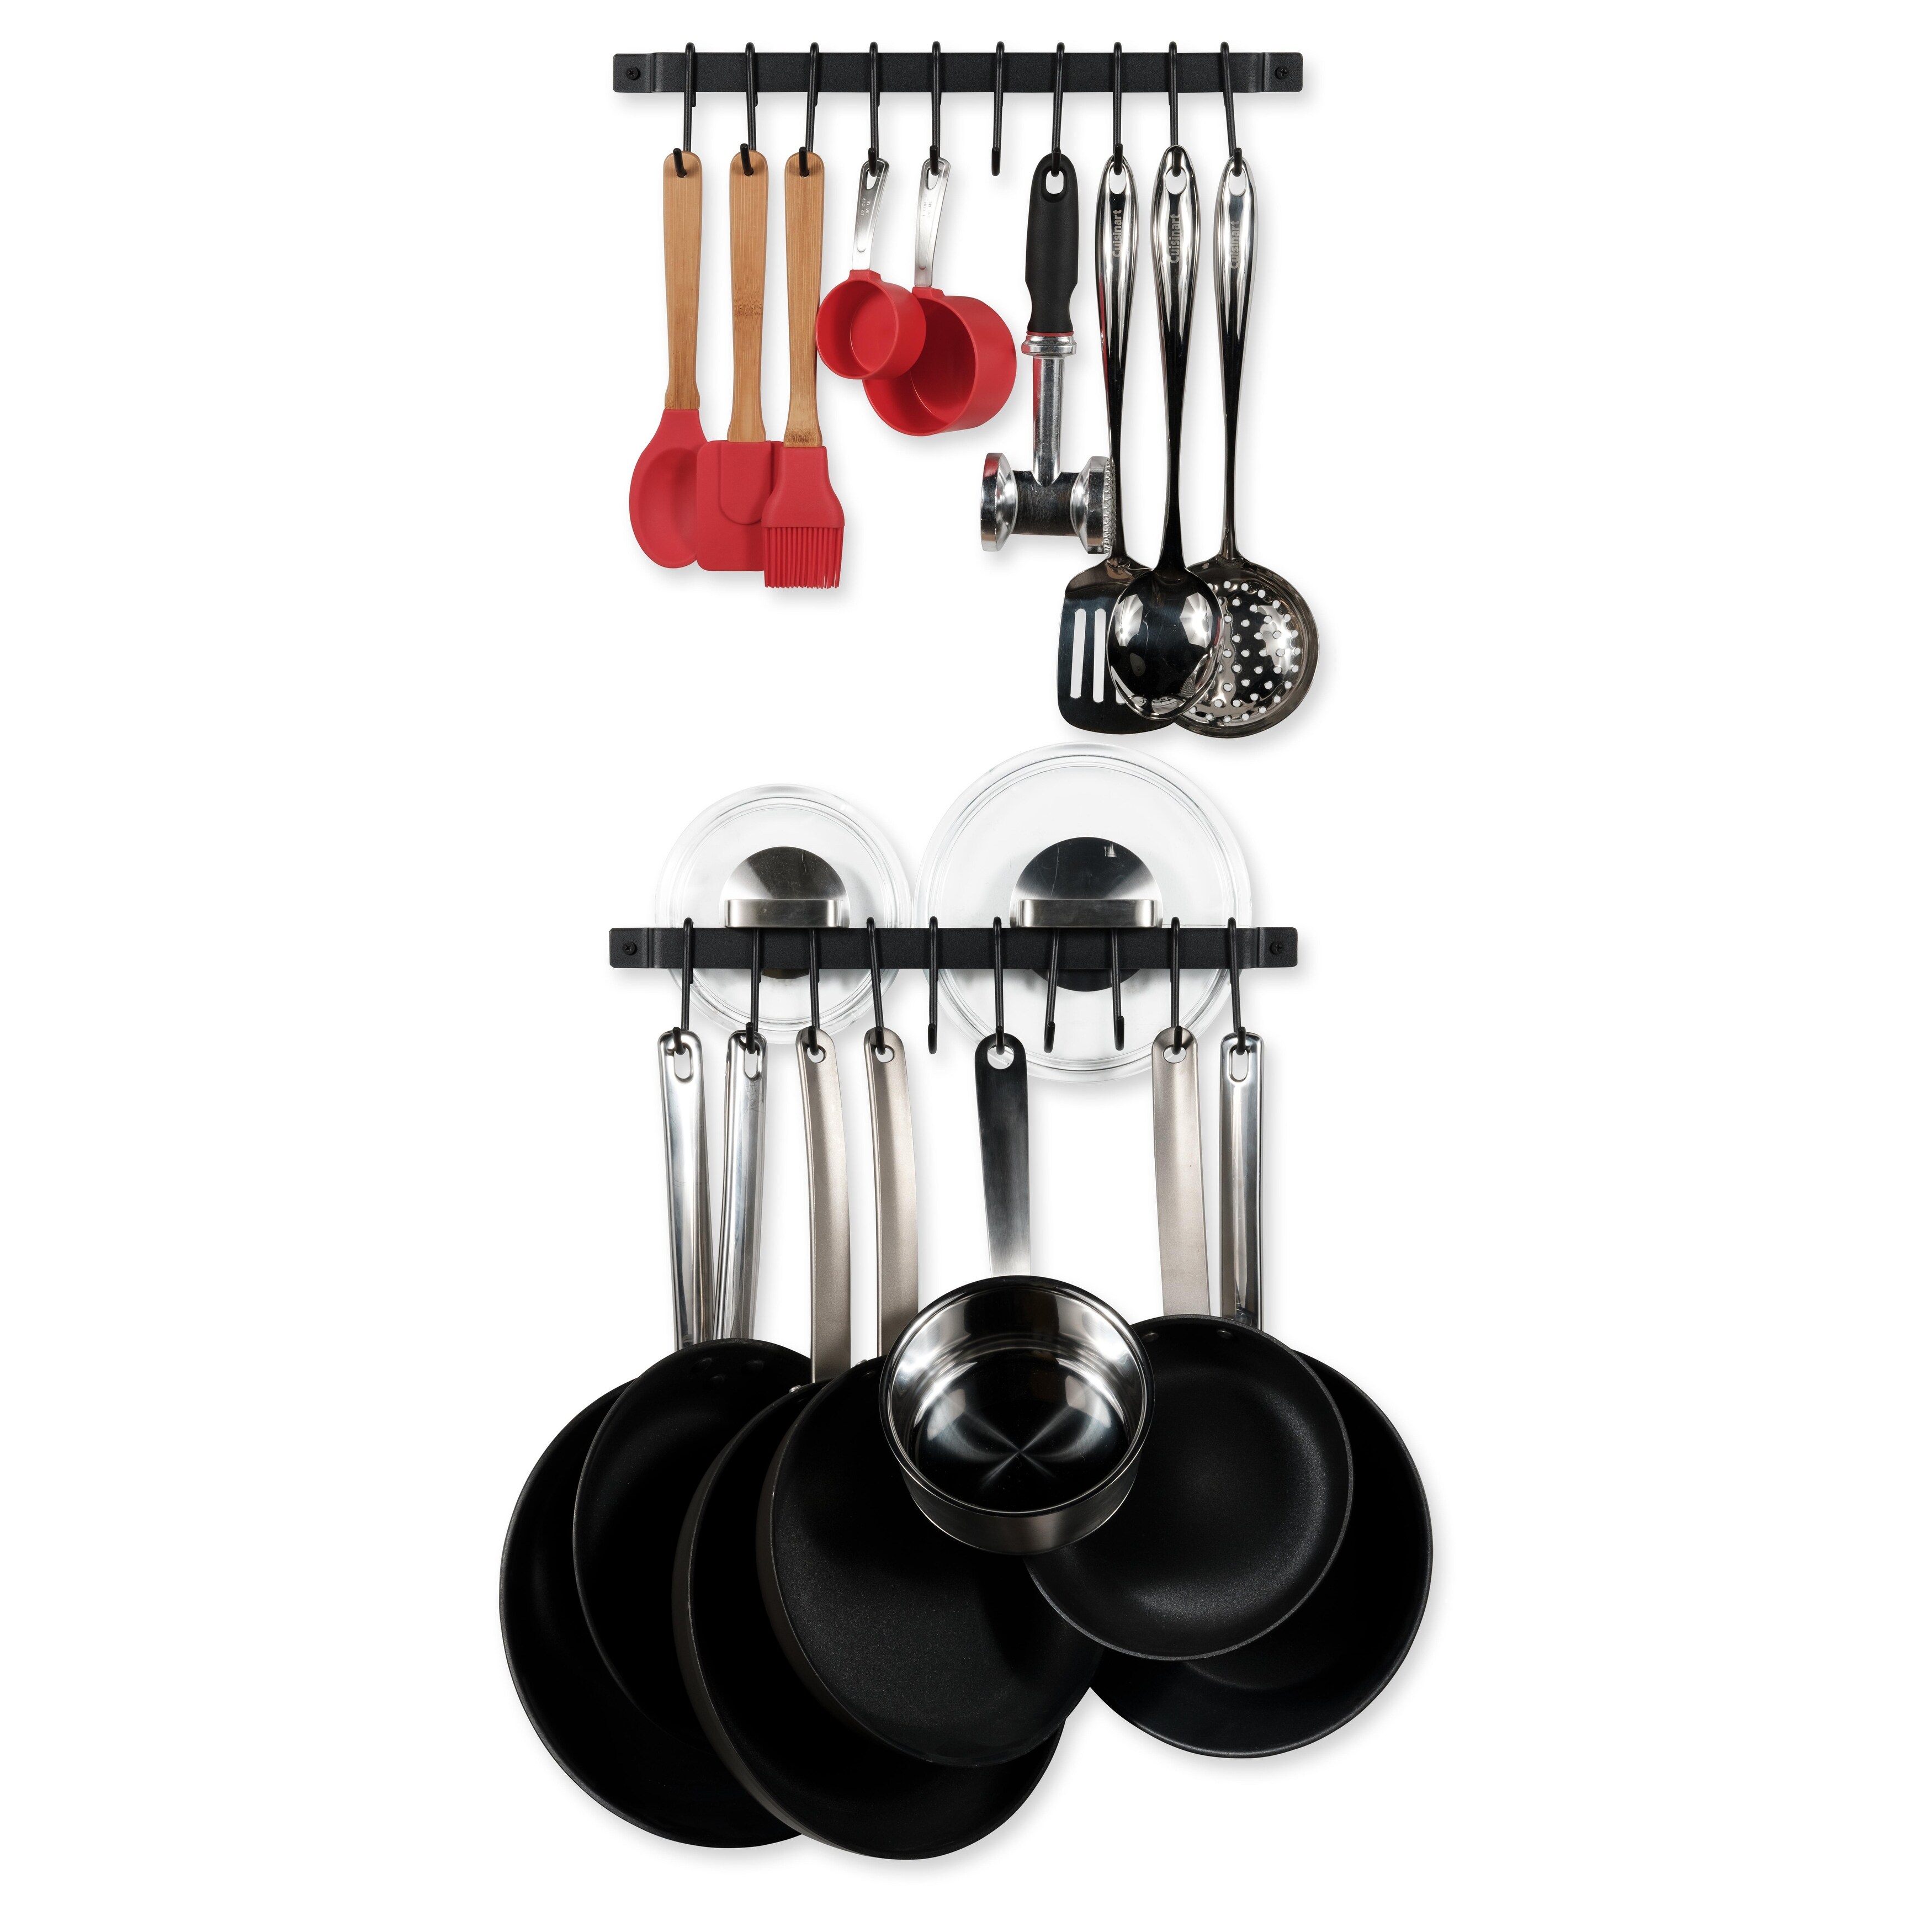 https://ak1.ostkcdn.com/images/products/is/images/direct/58e336dd66fcbc8a2678ad22cd2aa91d34c23cd4/Wallniture-Casto-17%22-Pot-Rack-Set-of-2%2C-Utensil-Holder-with-20-S-Hooks%2C-Iron%2C-Black.jpg